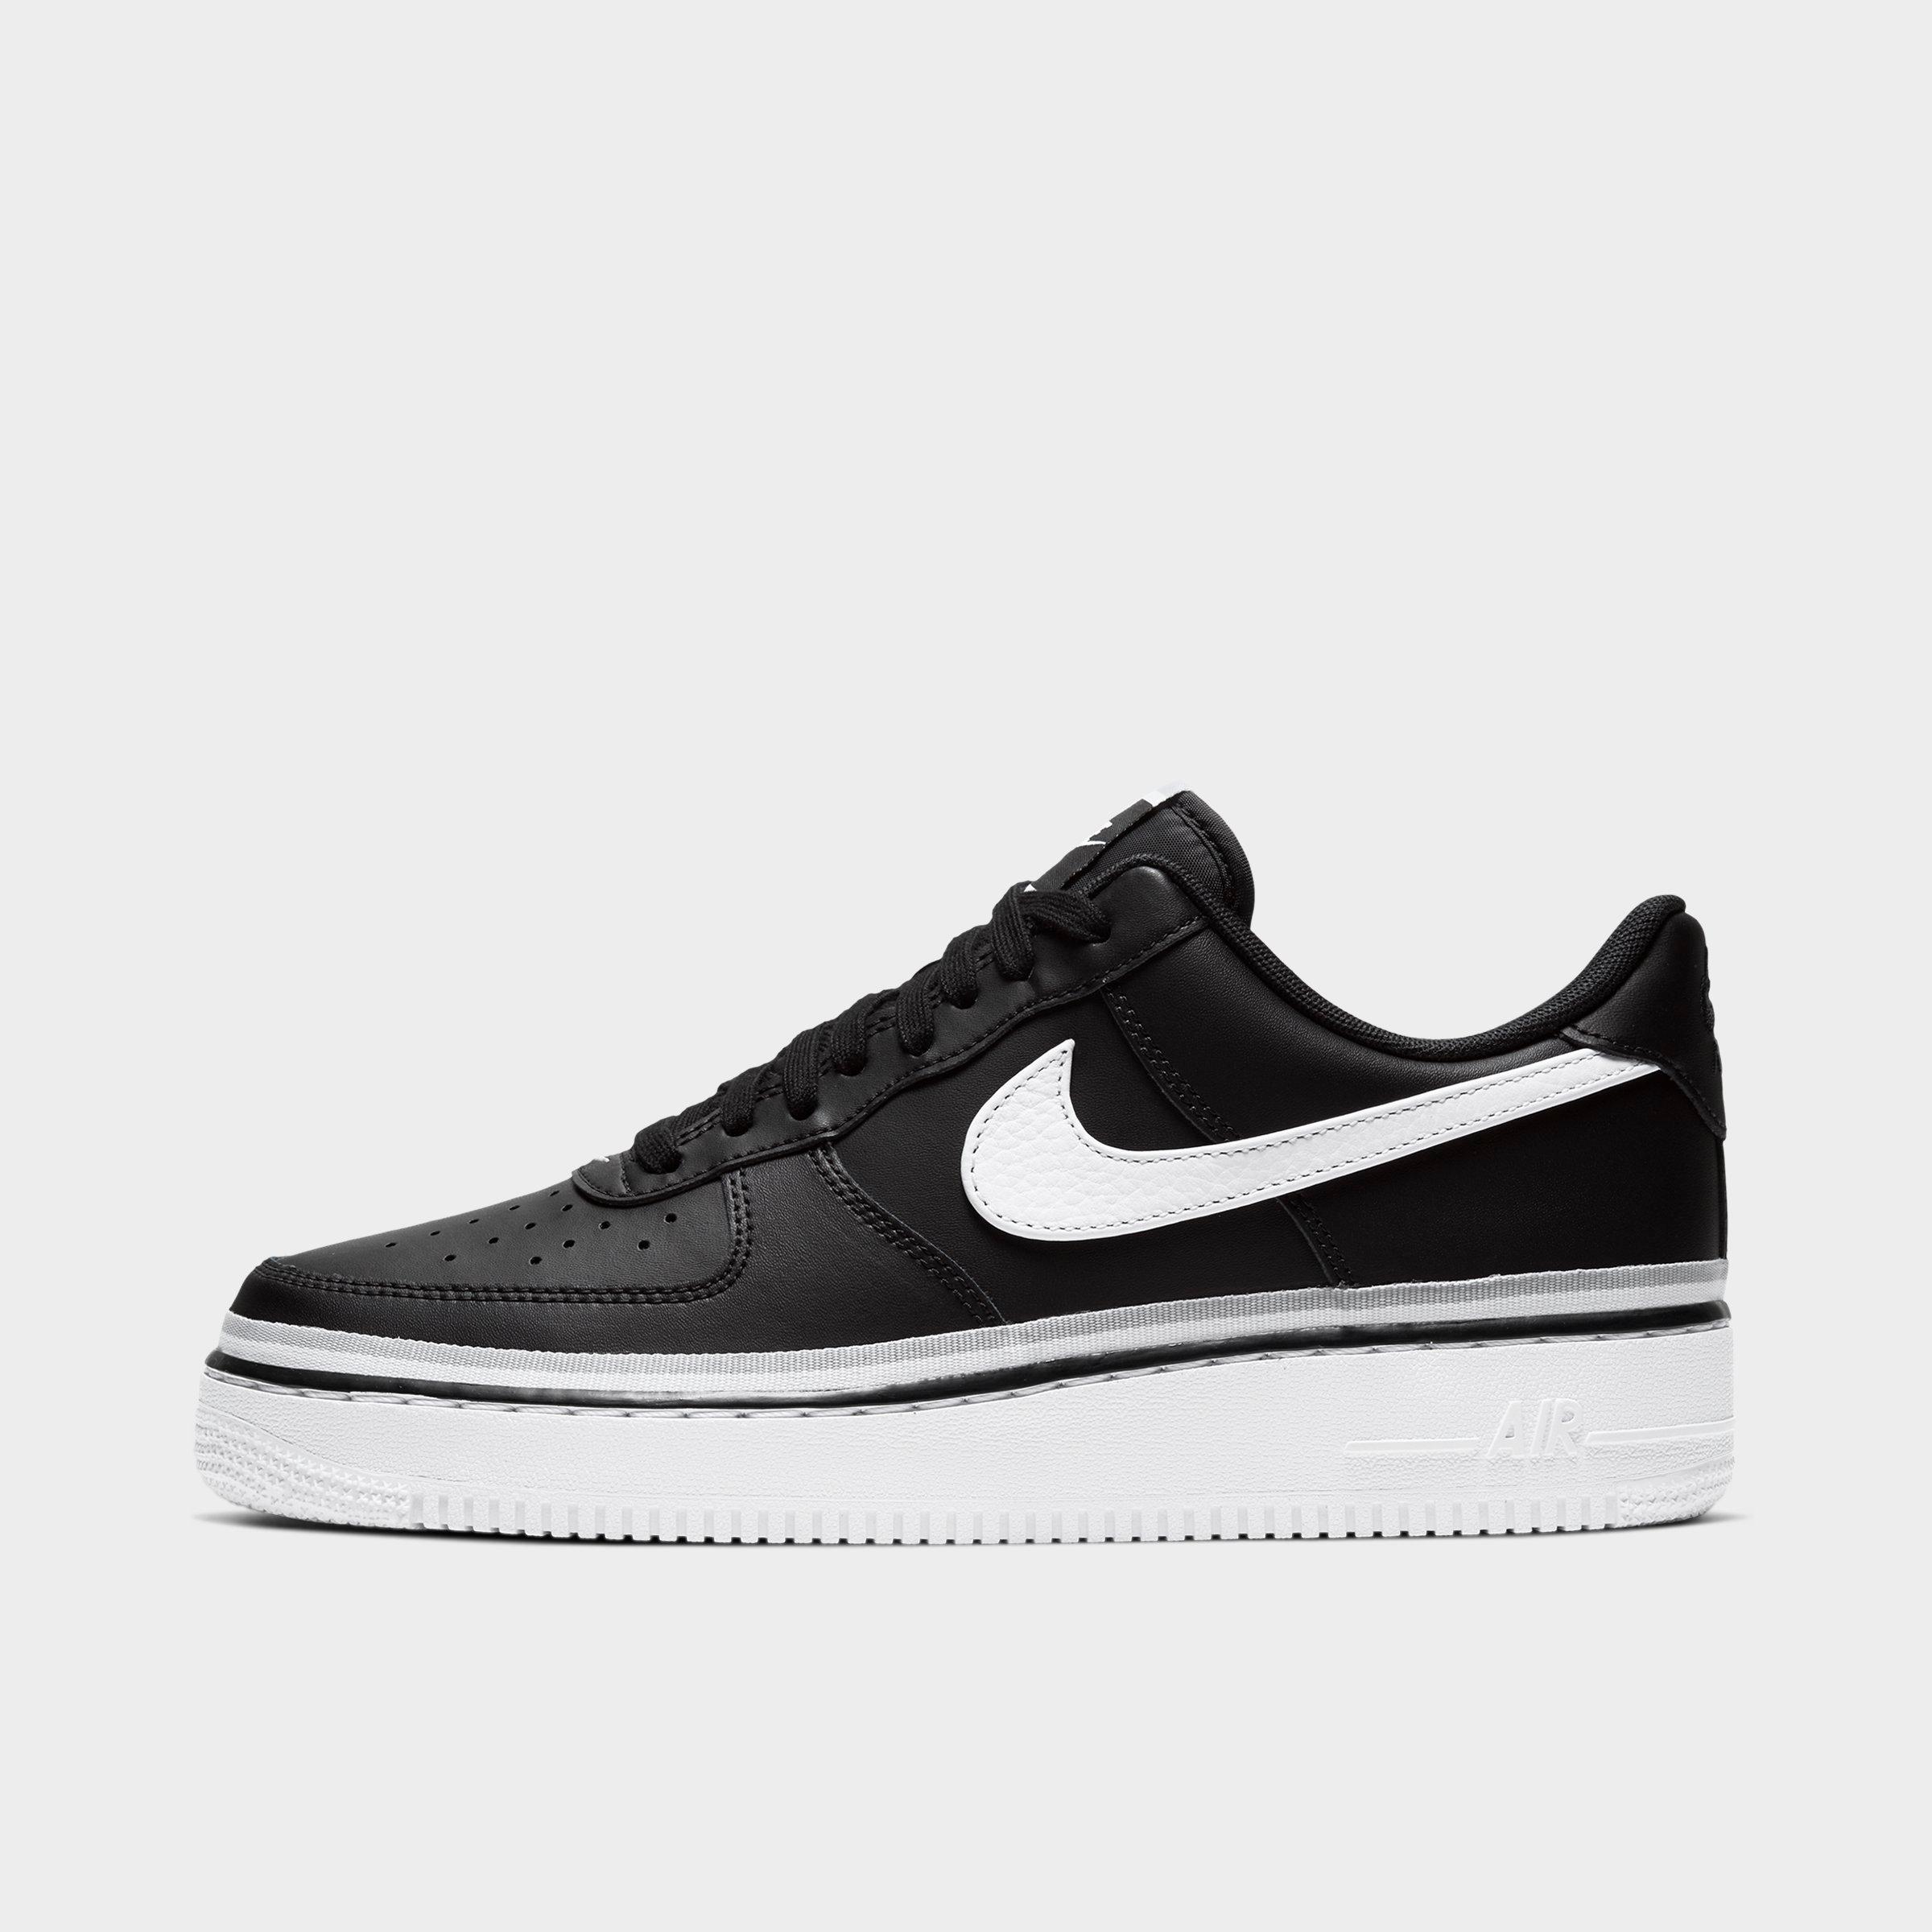 Men's Nike Air Force 1 '07 LV8 Casual Shoes| JD Sports